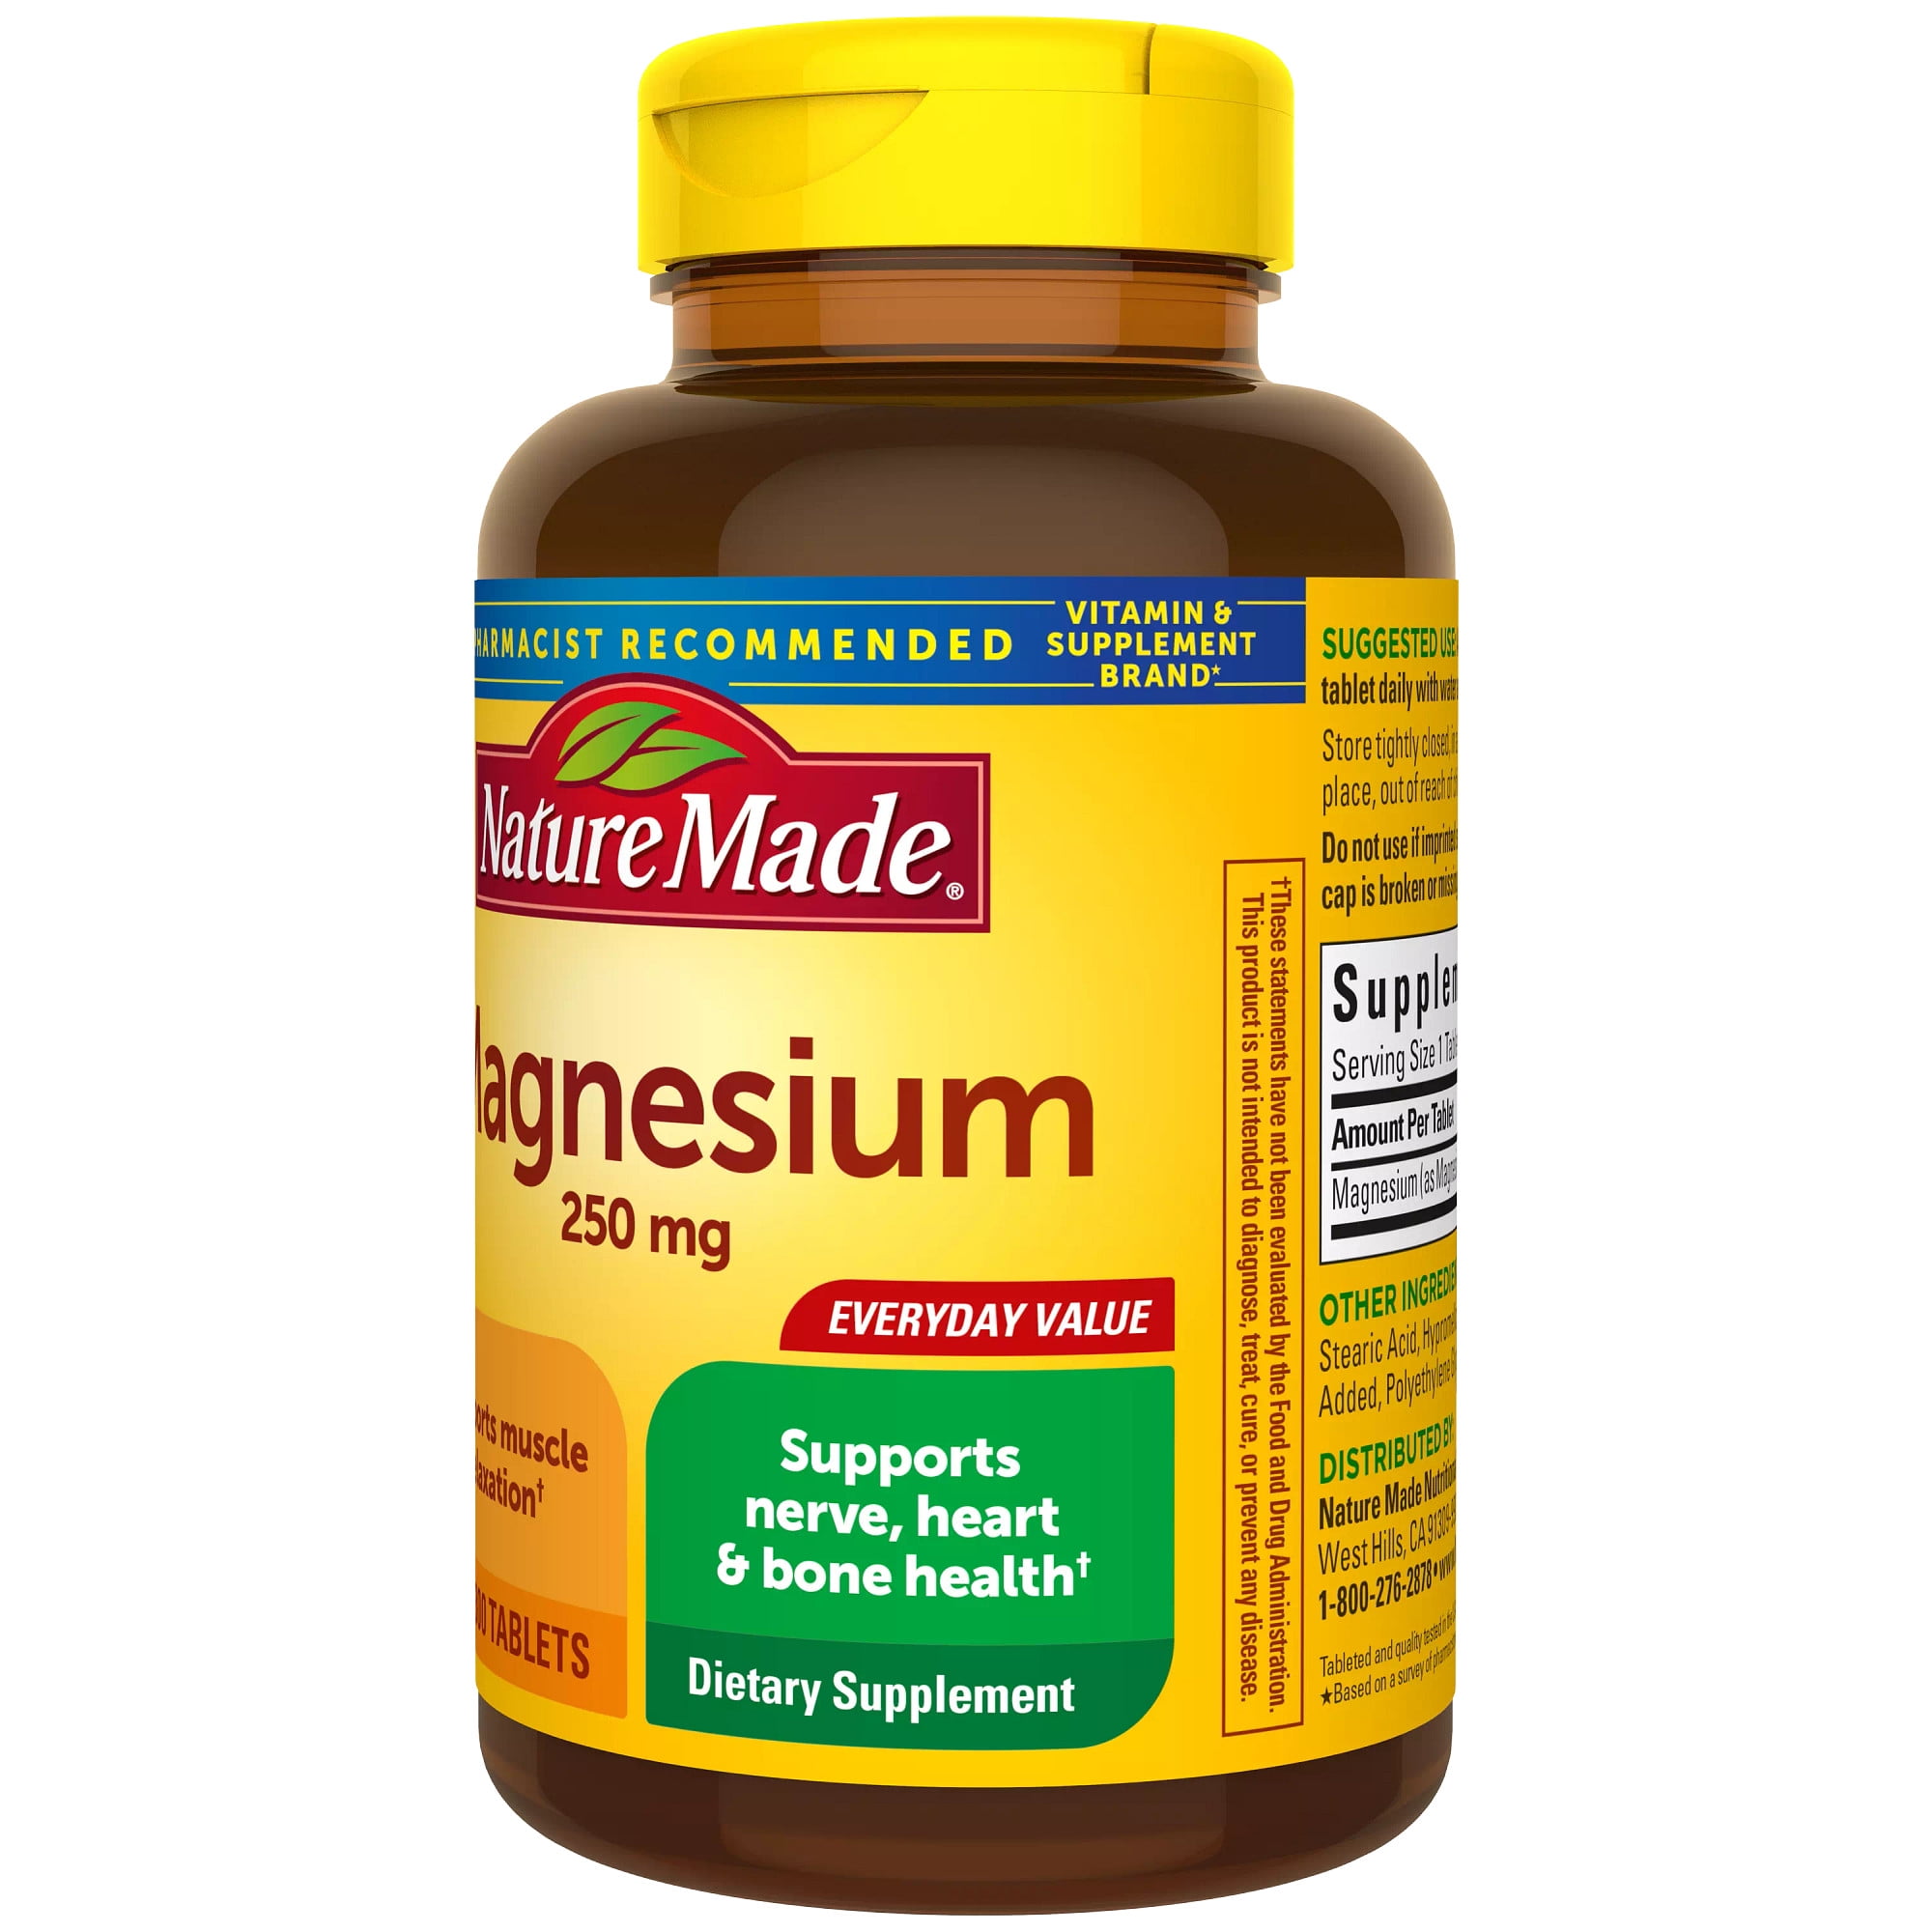 Nature Made Magnesium Oxide 250 mg Tablets, Dietary Supplement, 300 Count -  Walmart.com